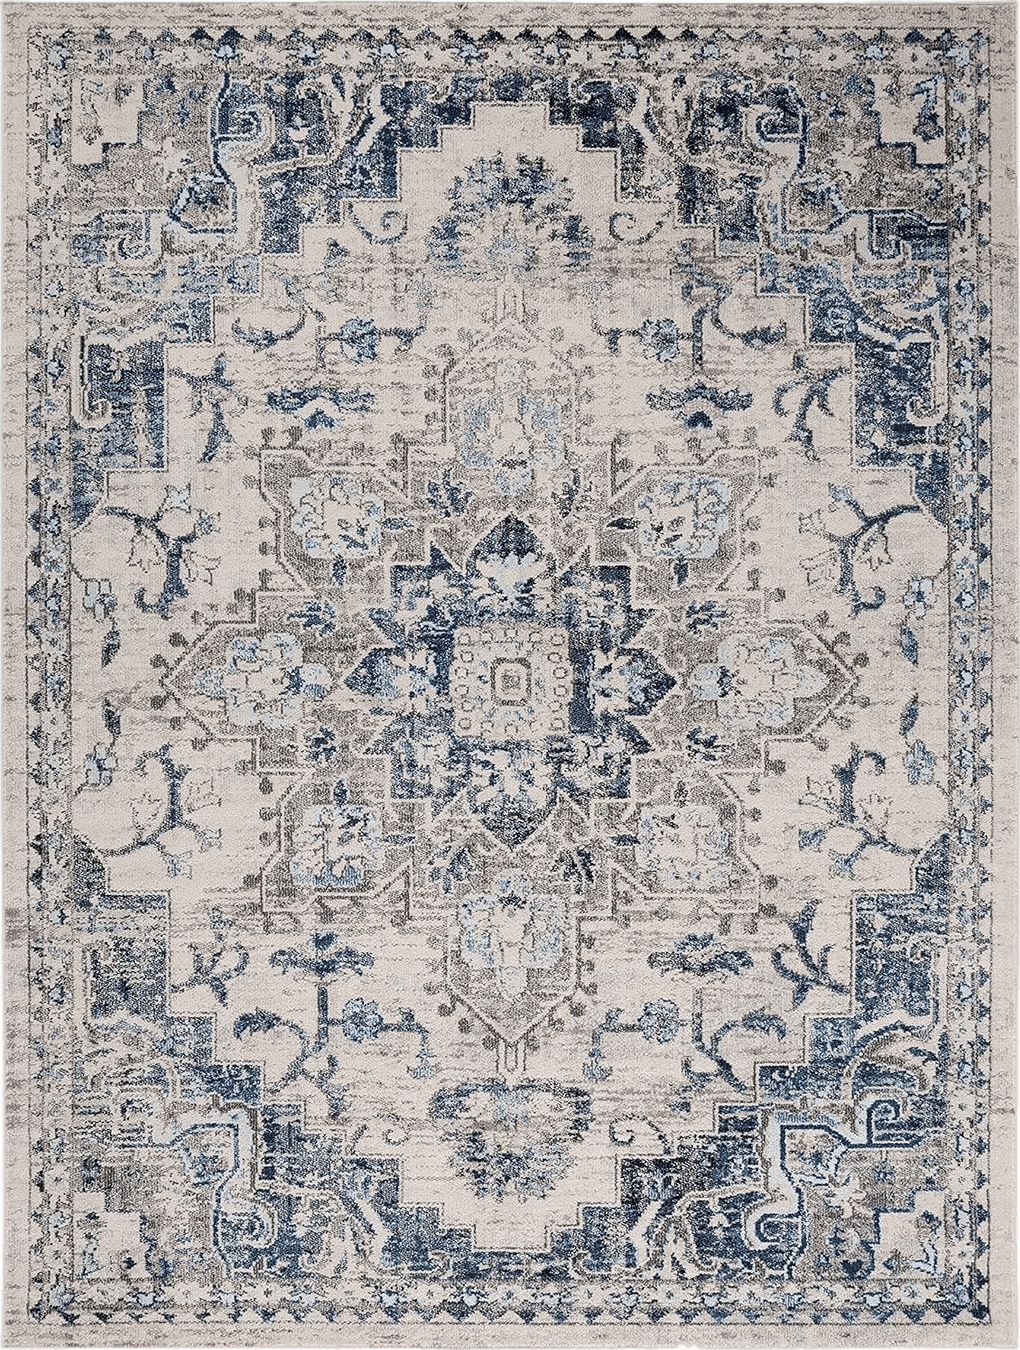 SAFAVIEH Madison Collection Area Rug - 5'3" x 7'6", Ivory & Grey, Boho Chic Medallion Distressed Design, Non-Shedding & Easy Care, Ideal for High Traffic Areas in Living Room, Bedroom (MAD473C)